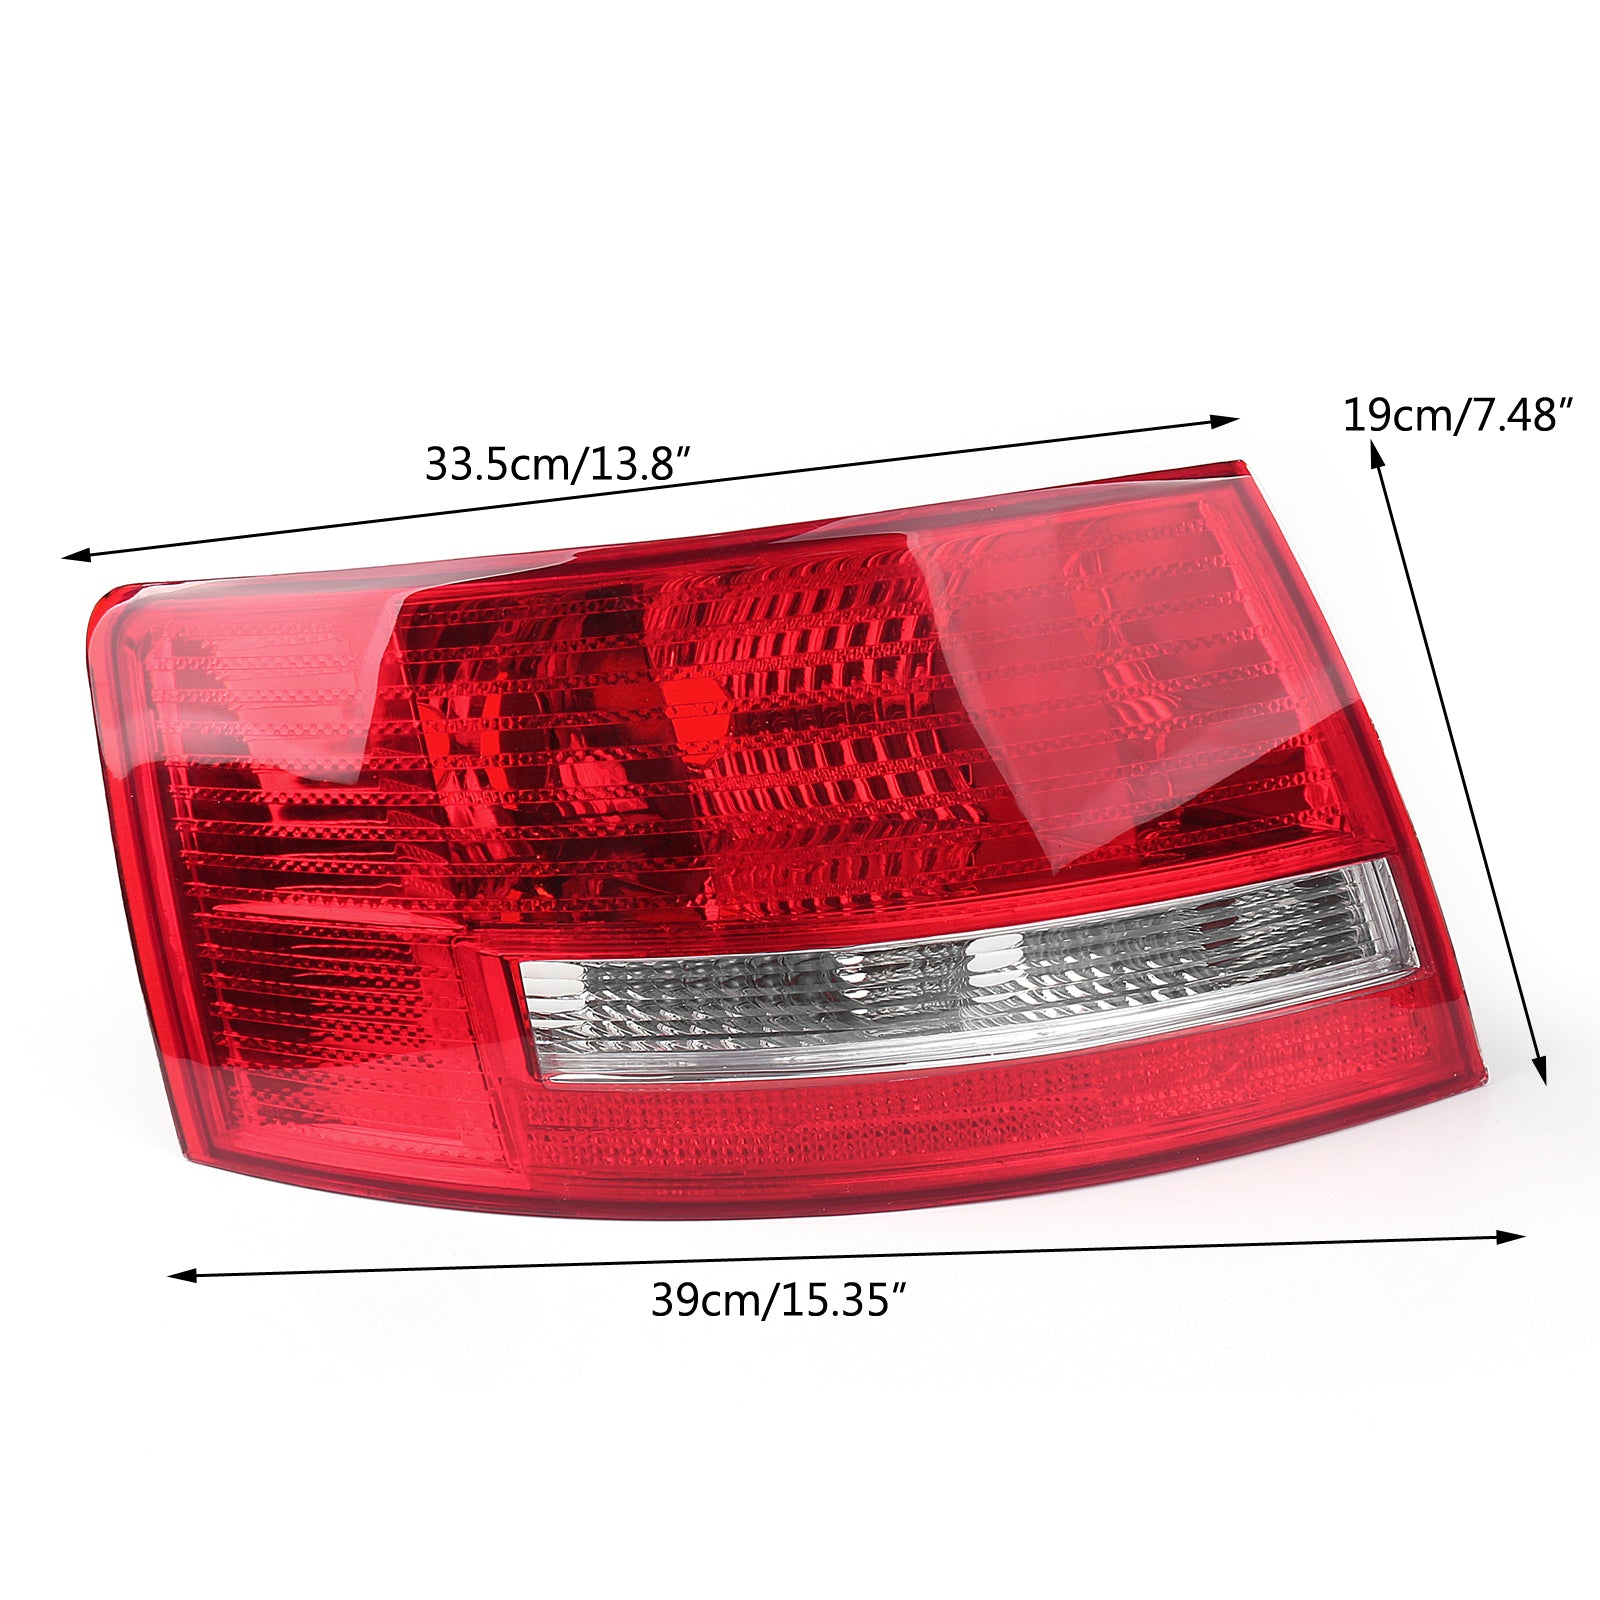 OEM Tail Light Cover Left Driver'S Side For 05-08 Quattro Audi A6 S6 C6 Generic